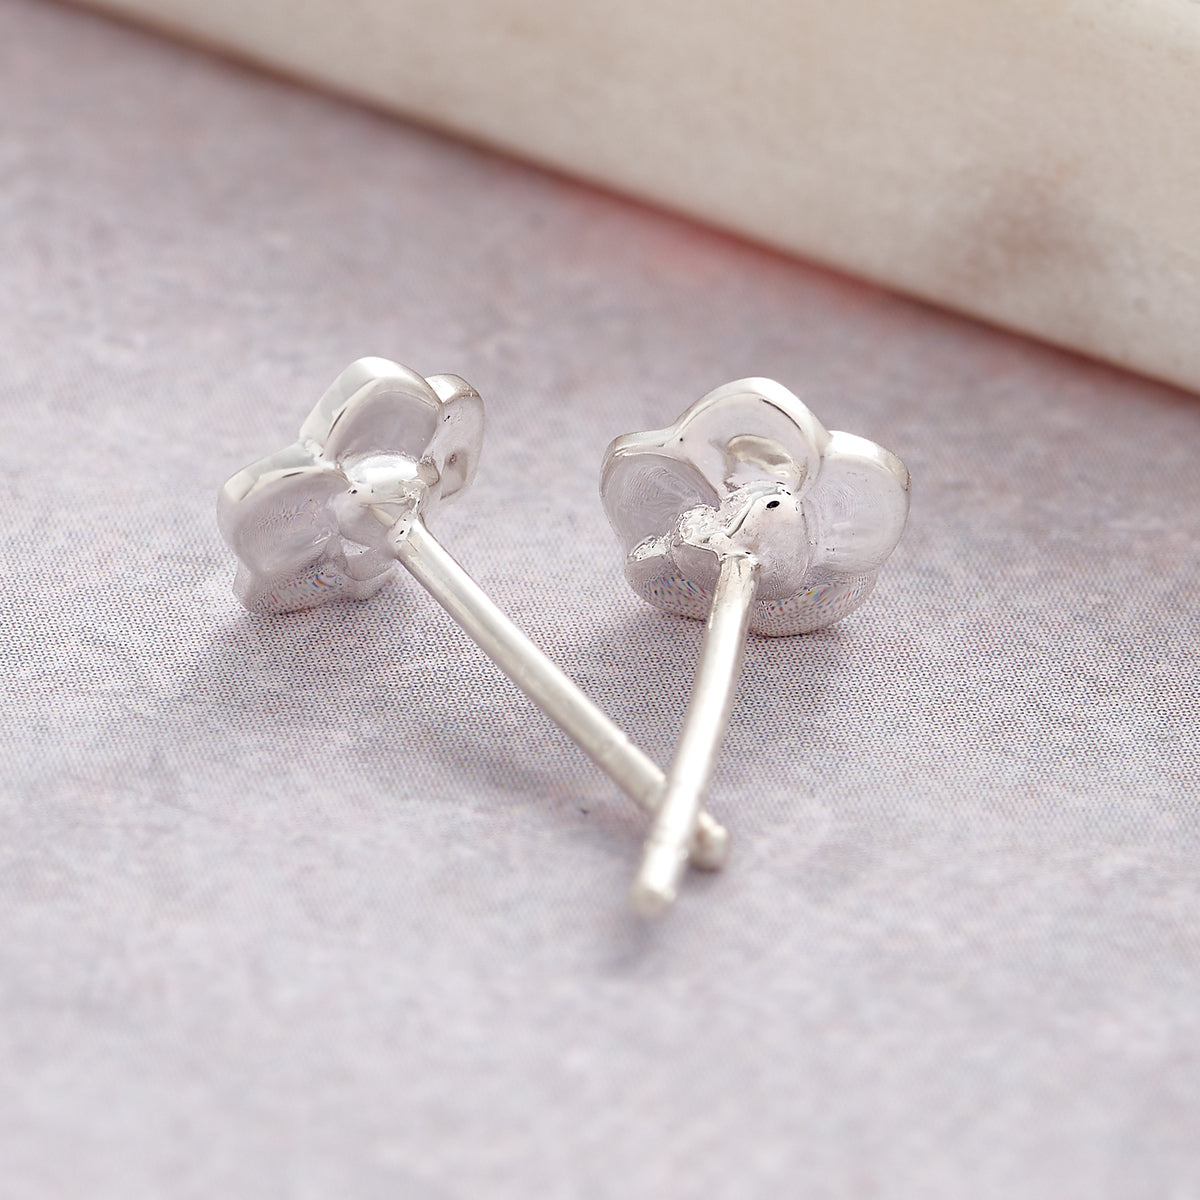 heart on back of tiny silver forget me not flower stud earrings for women and girls scarlett jewellery brighton